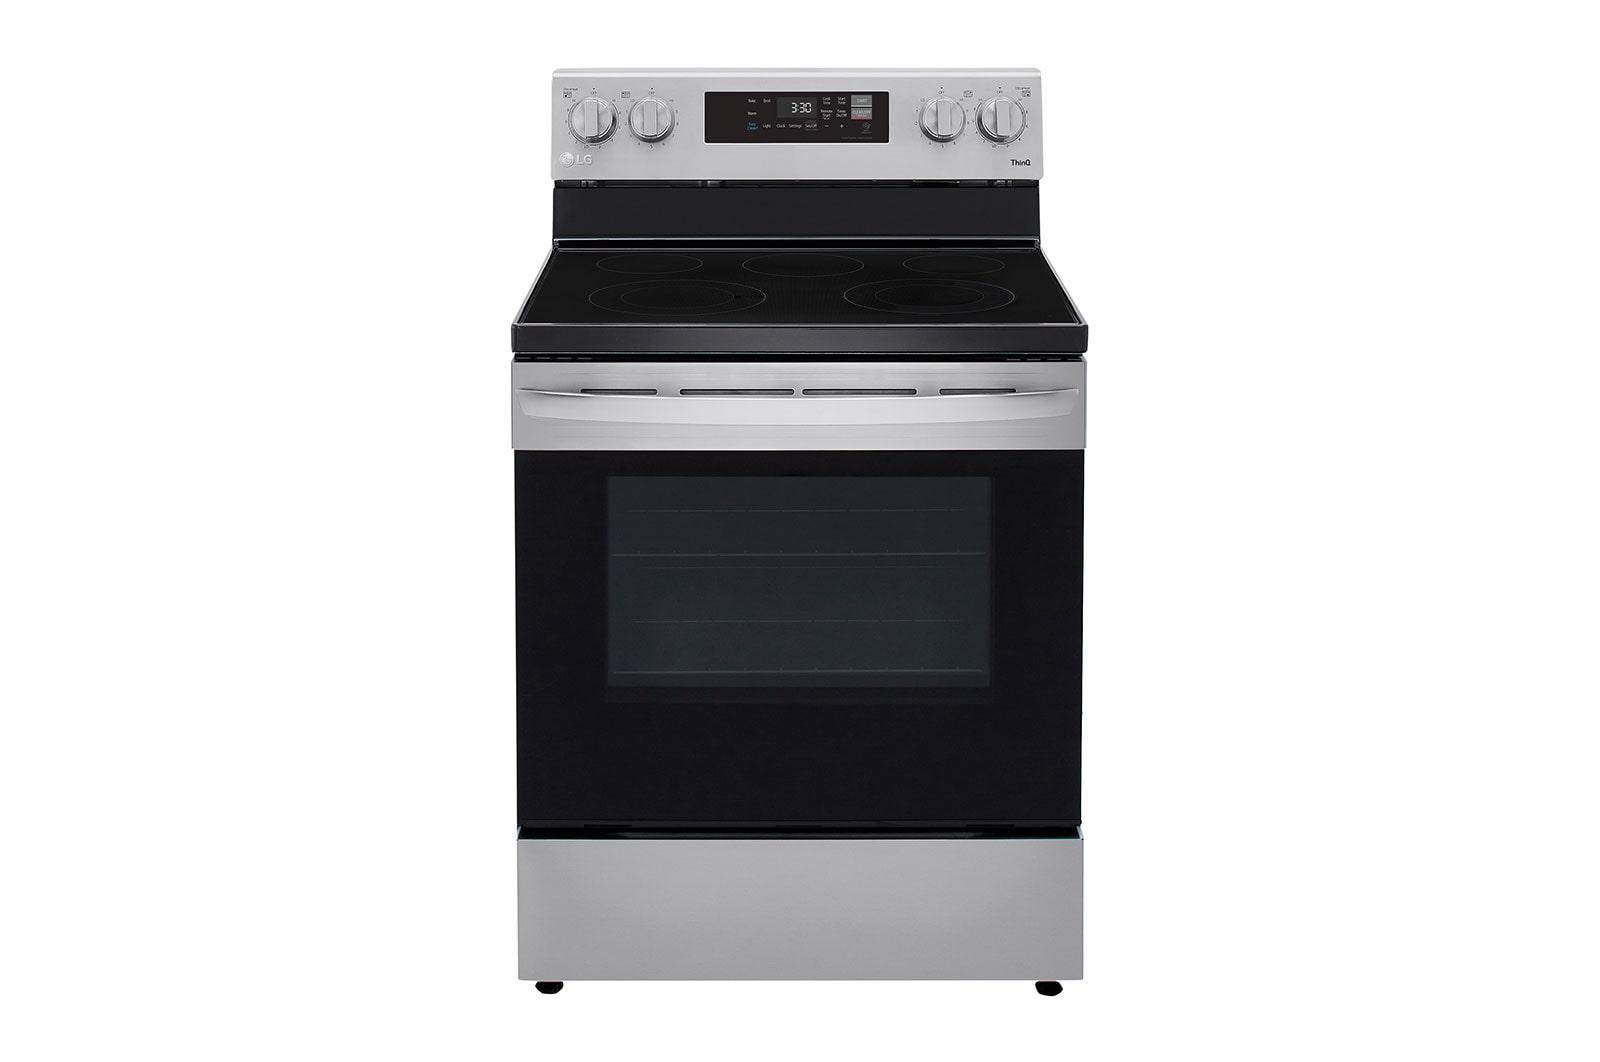 Lg 6.3 cu ft. Smart Wi-Fi Enabled Electric Range with EasyClean®